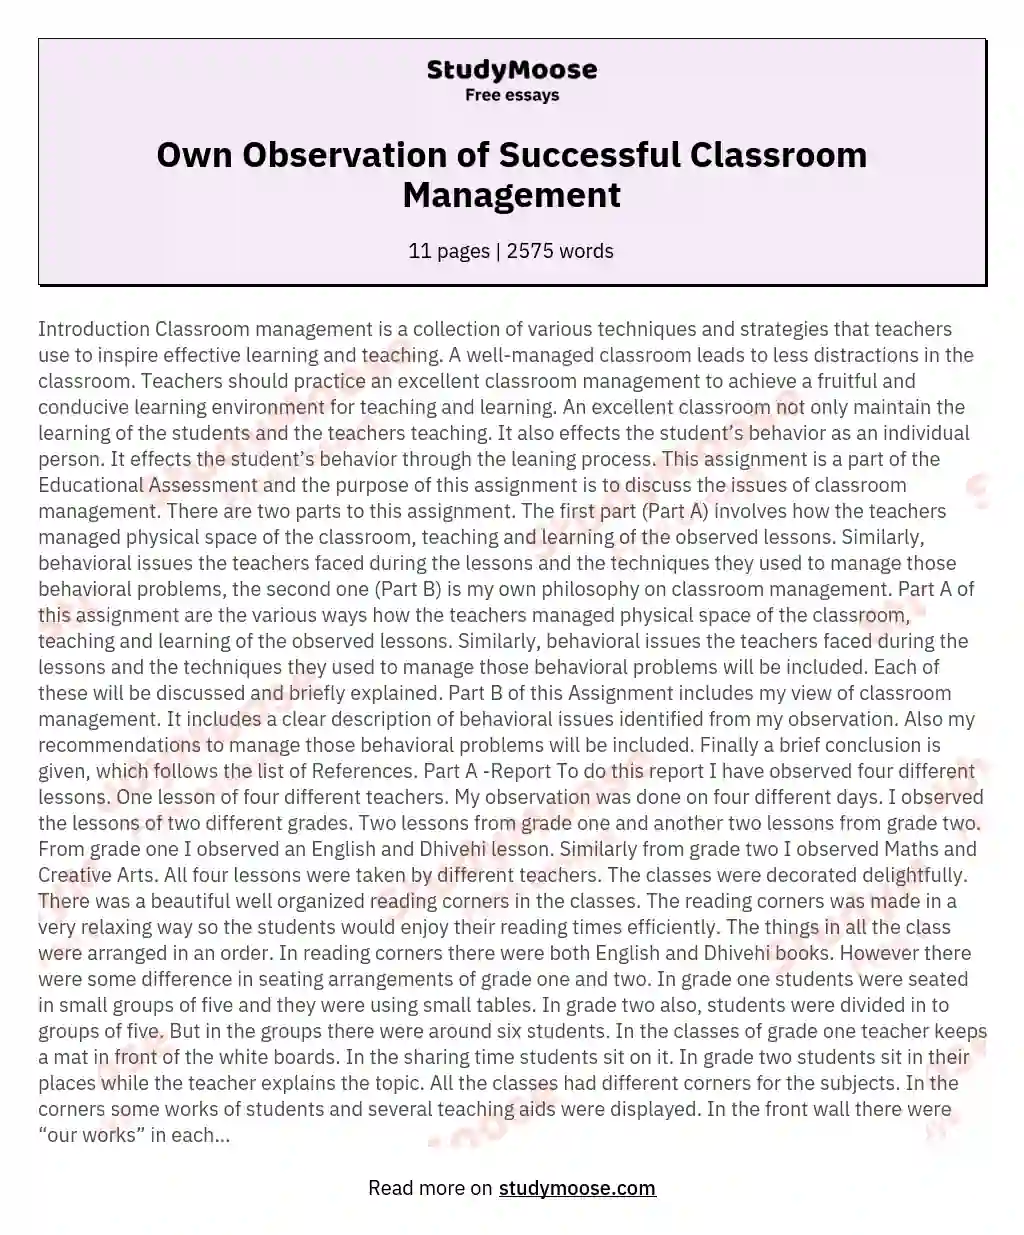 Own Observation of Successful Classroom Management